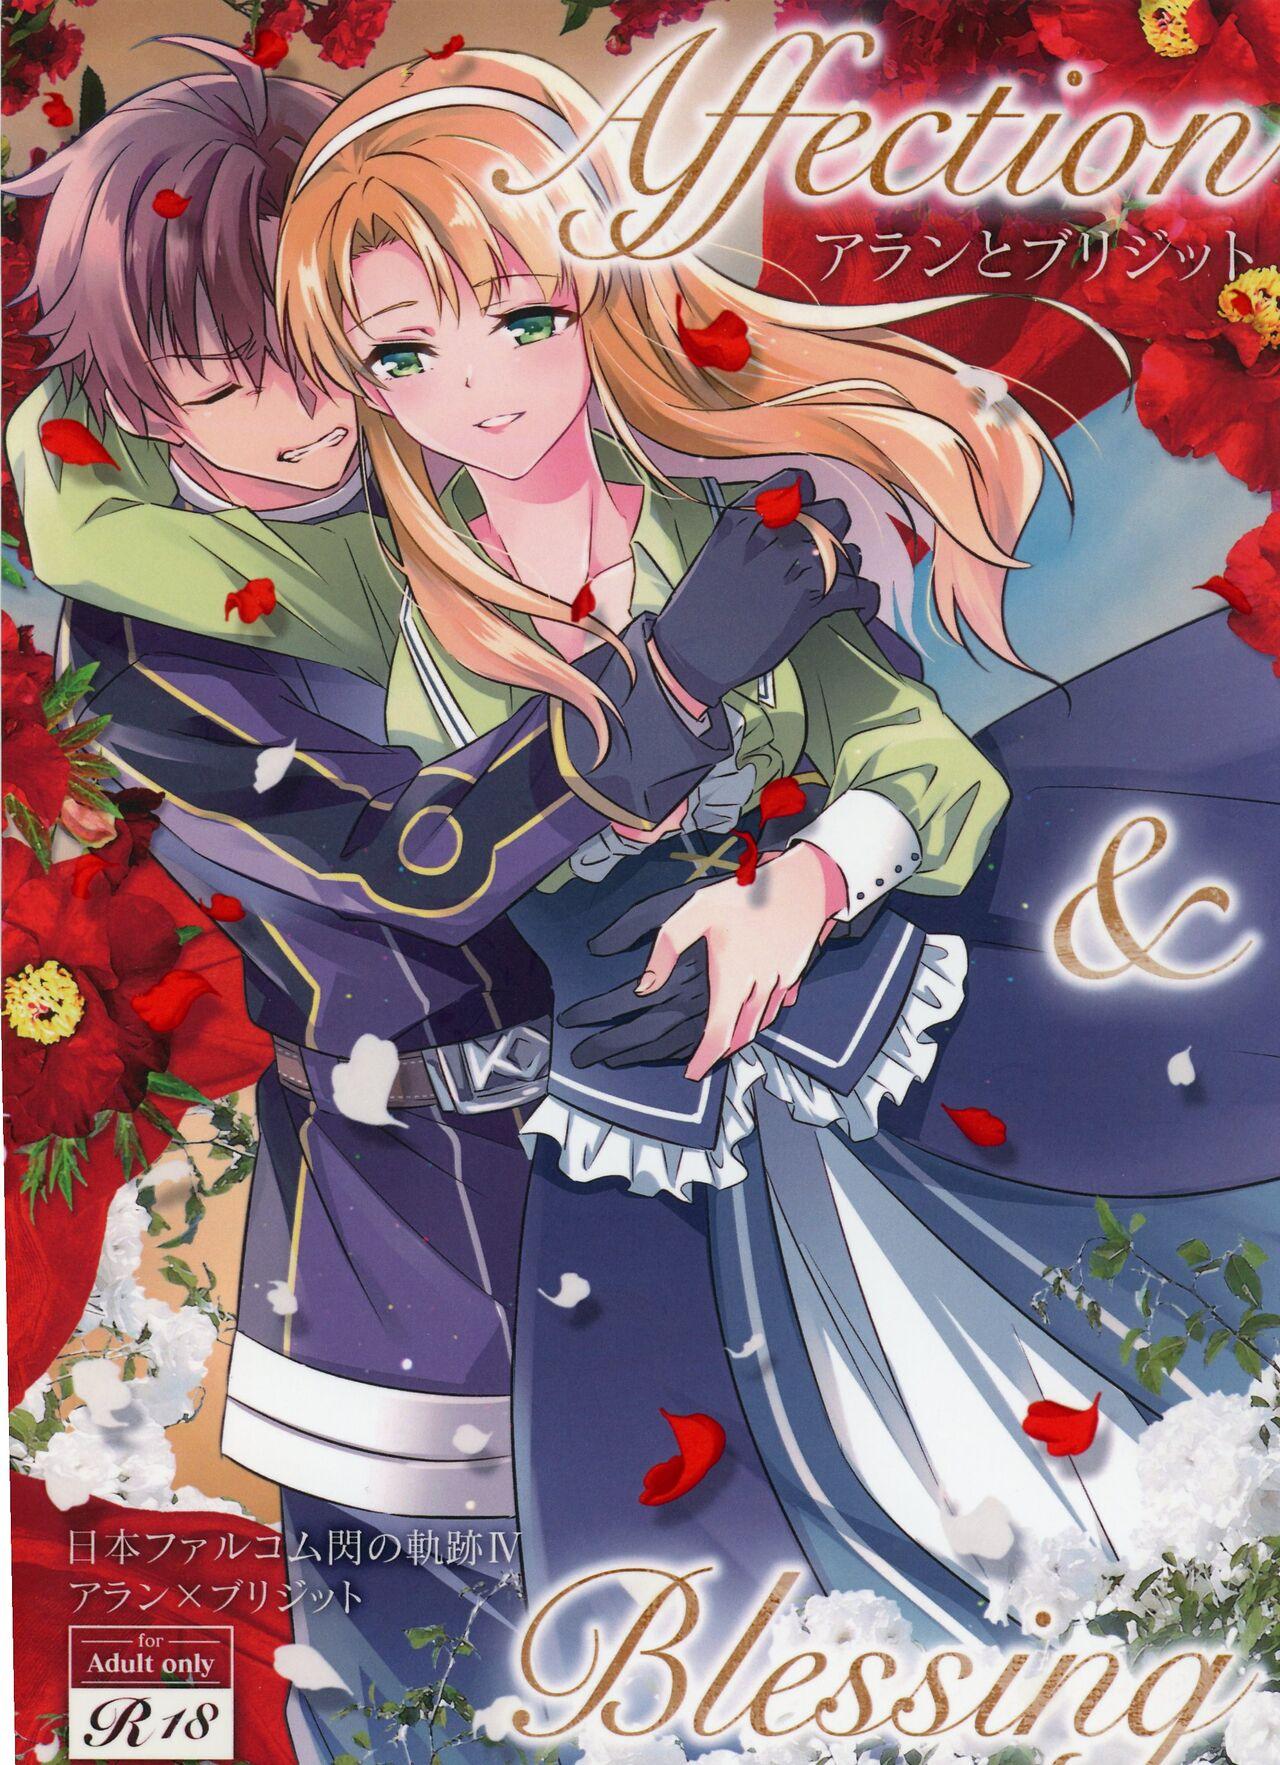 Gapes Gaping Asshole Affection & Blessing - The legend of heroes | eiyuu densetsu Shaking - Picture 1